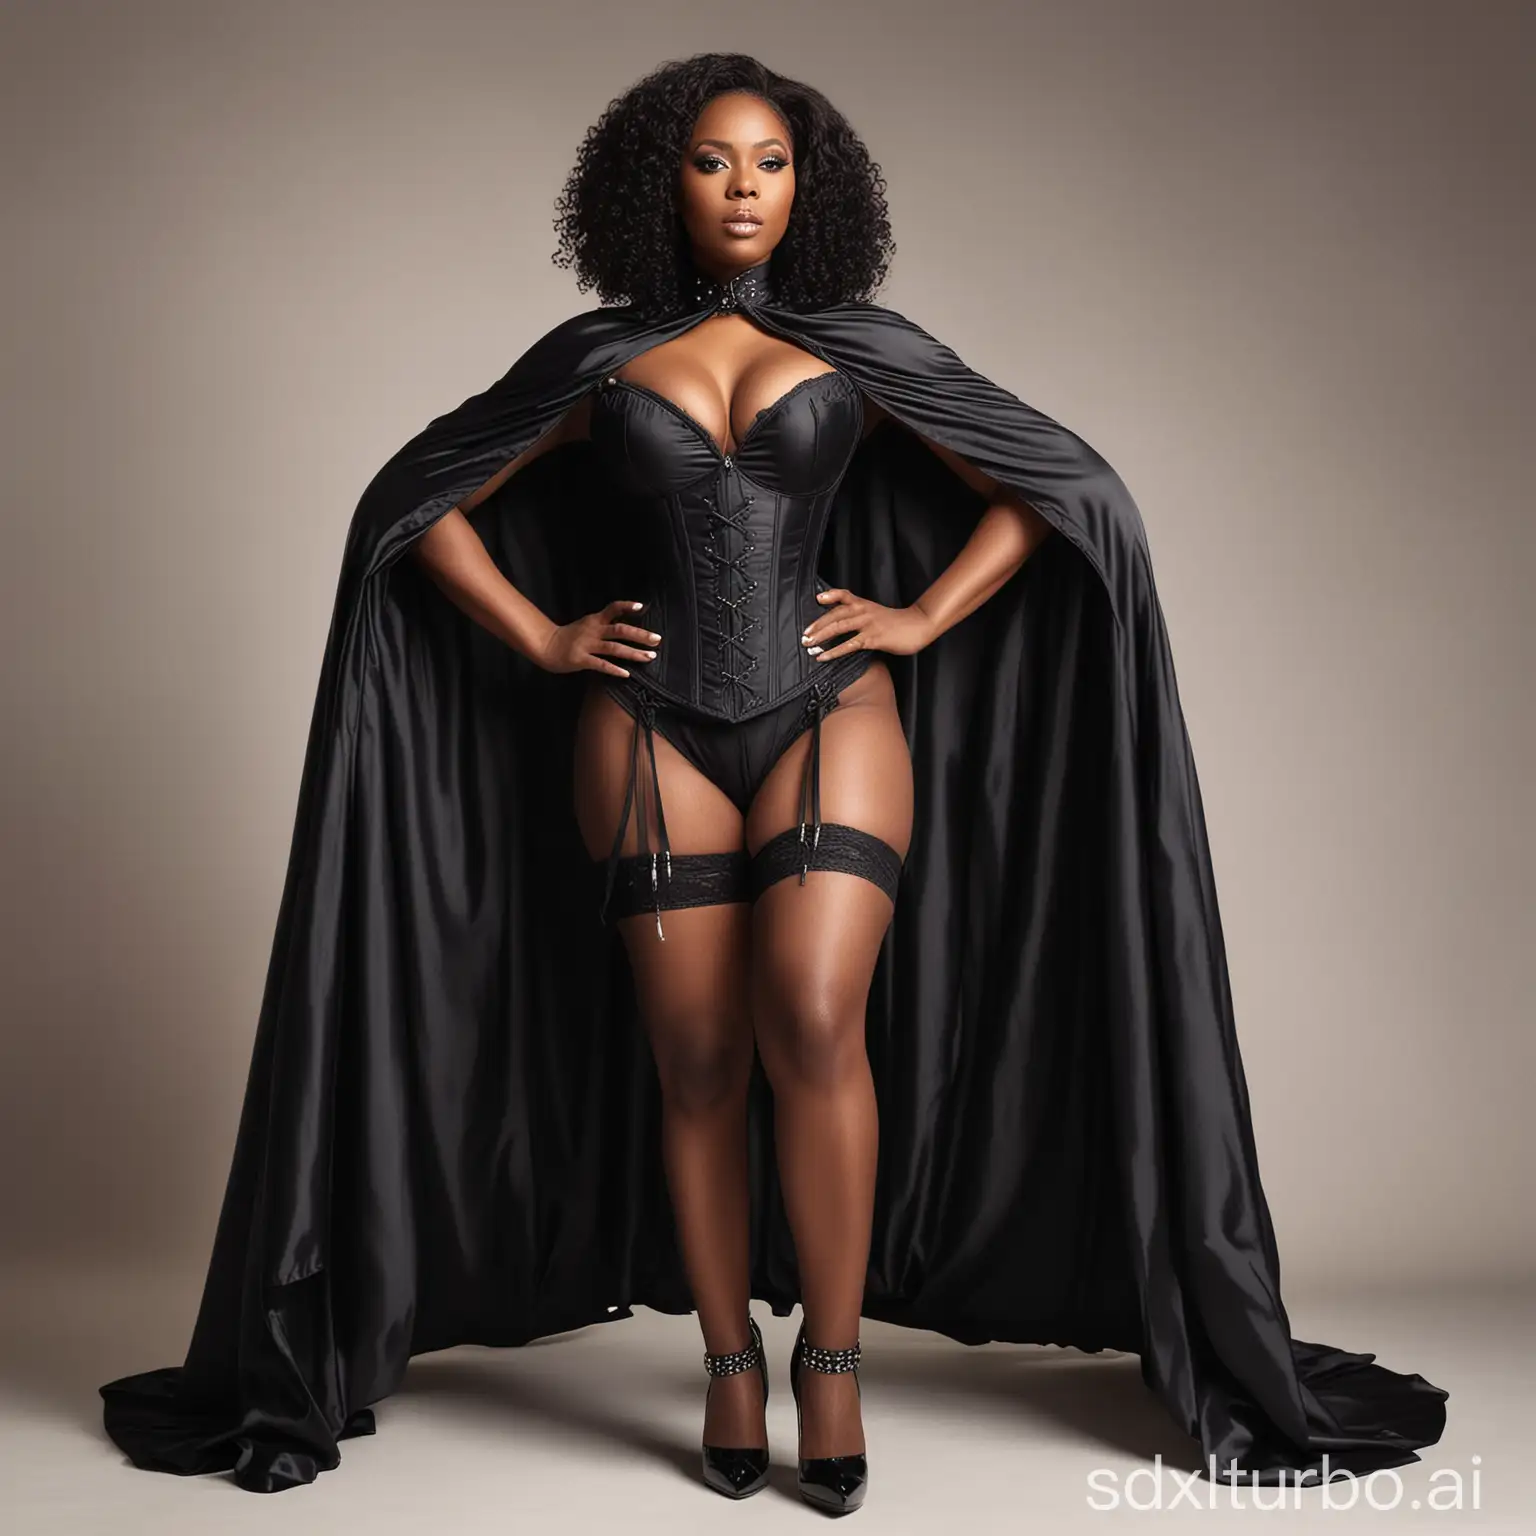 black woman, large breasts, wears black cape with high collar, wears corset, wears high heels